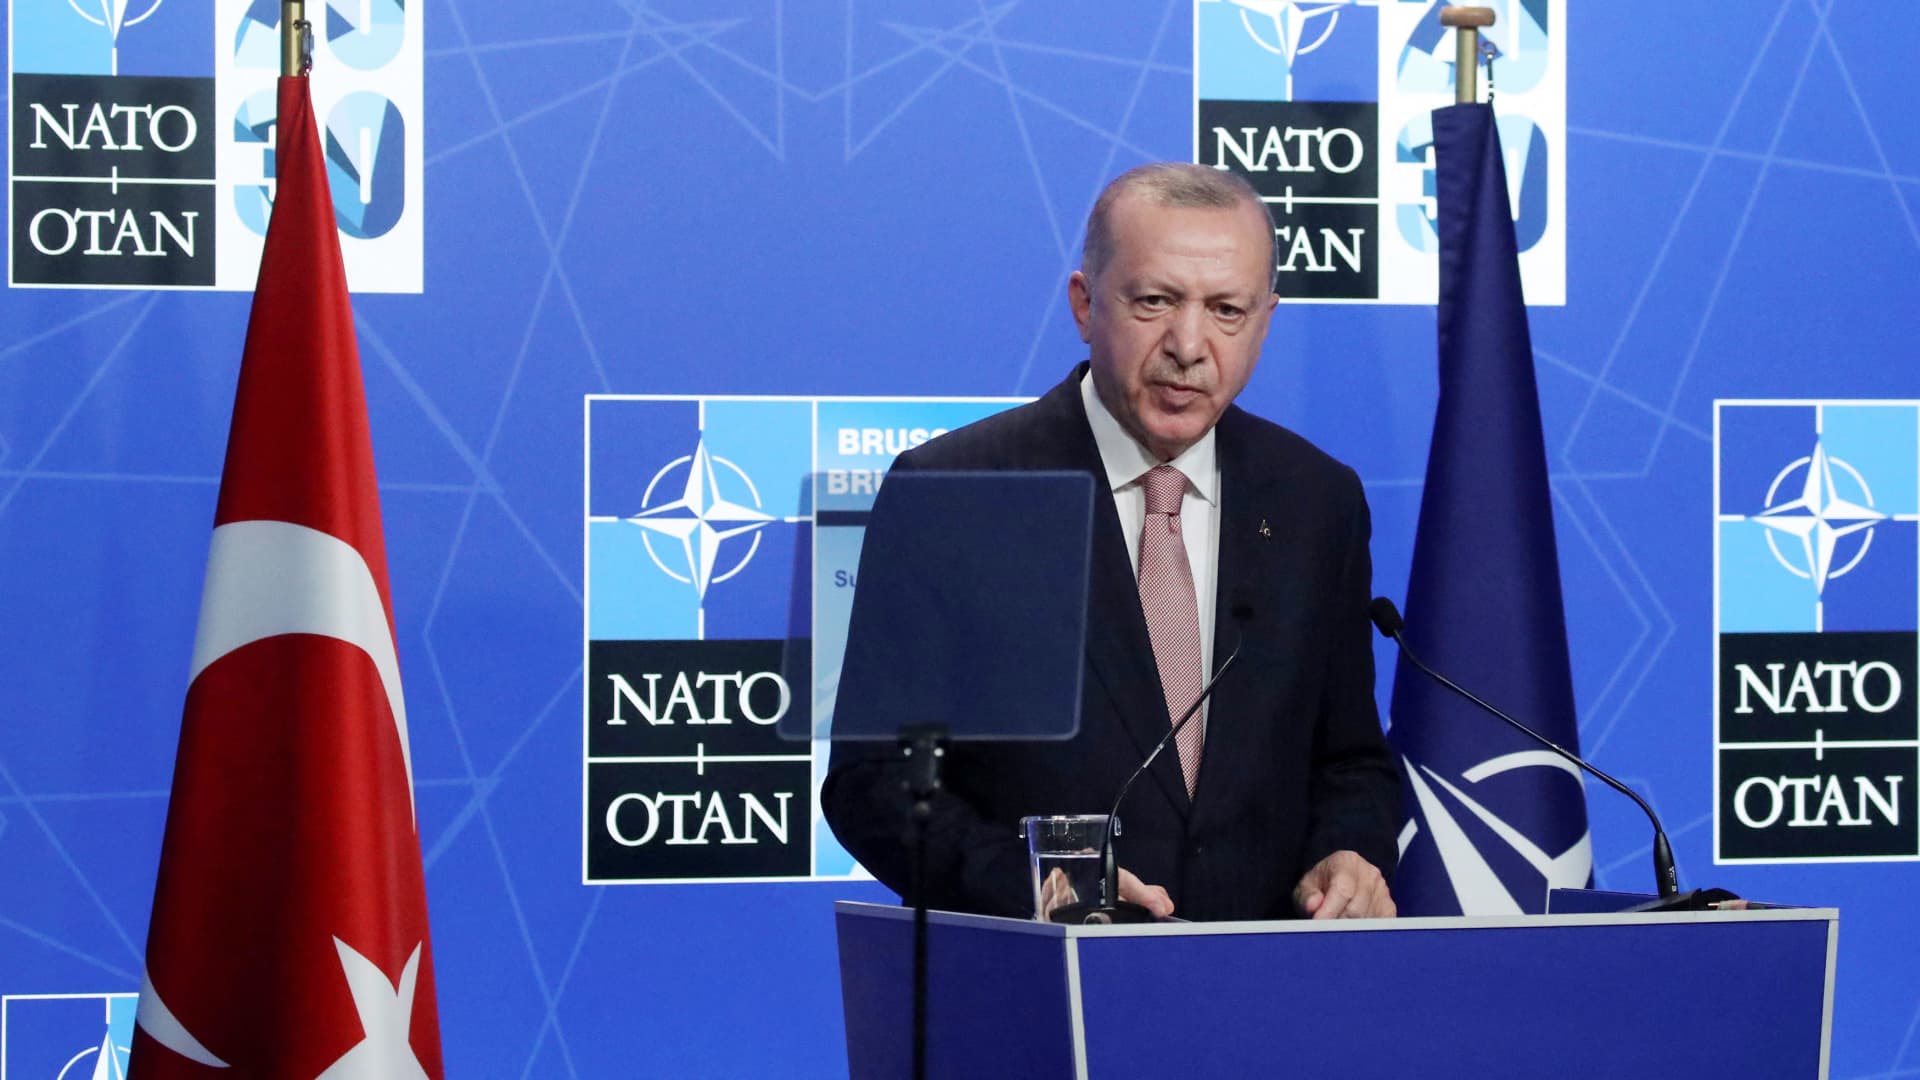 Turkey's President Tayyip Erdogan holds a news conference during the NATO summit at the Alliance's headquarters in Brussels, Belgium June 14, 2021.